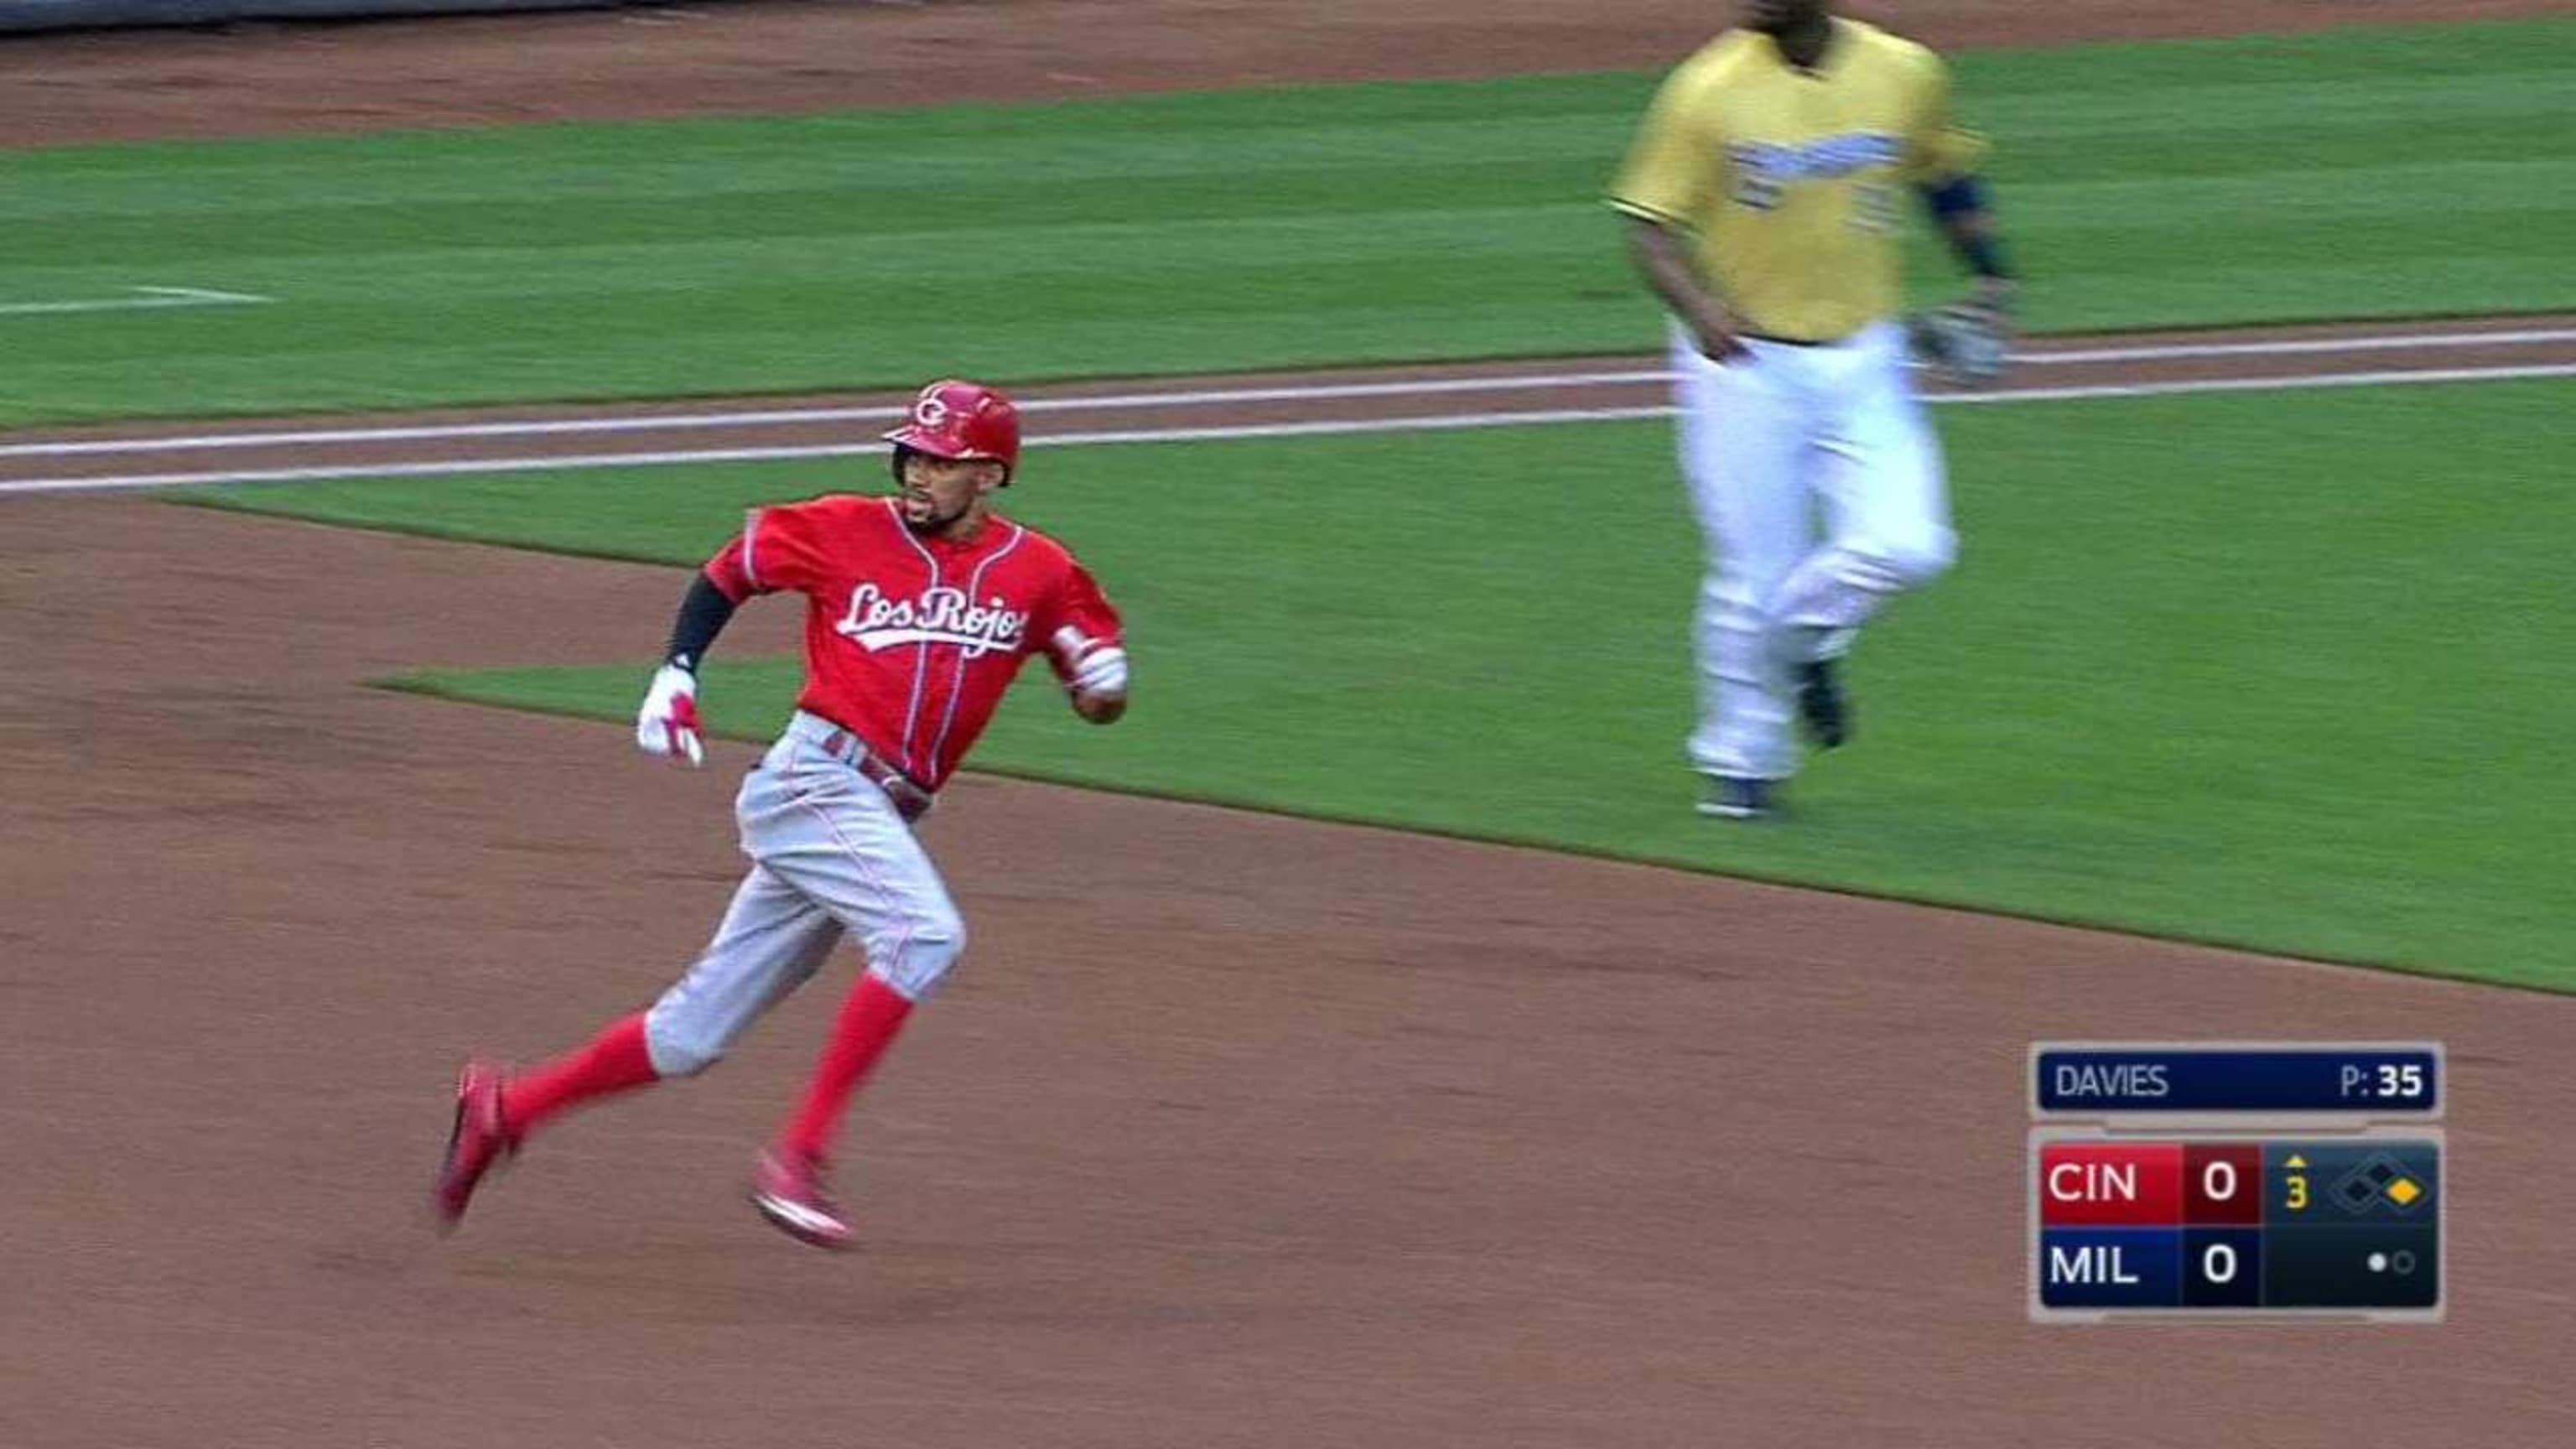 Billy Hamilton recorded the fastest home run trot in Statcast